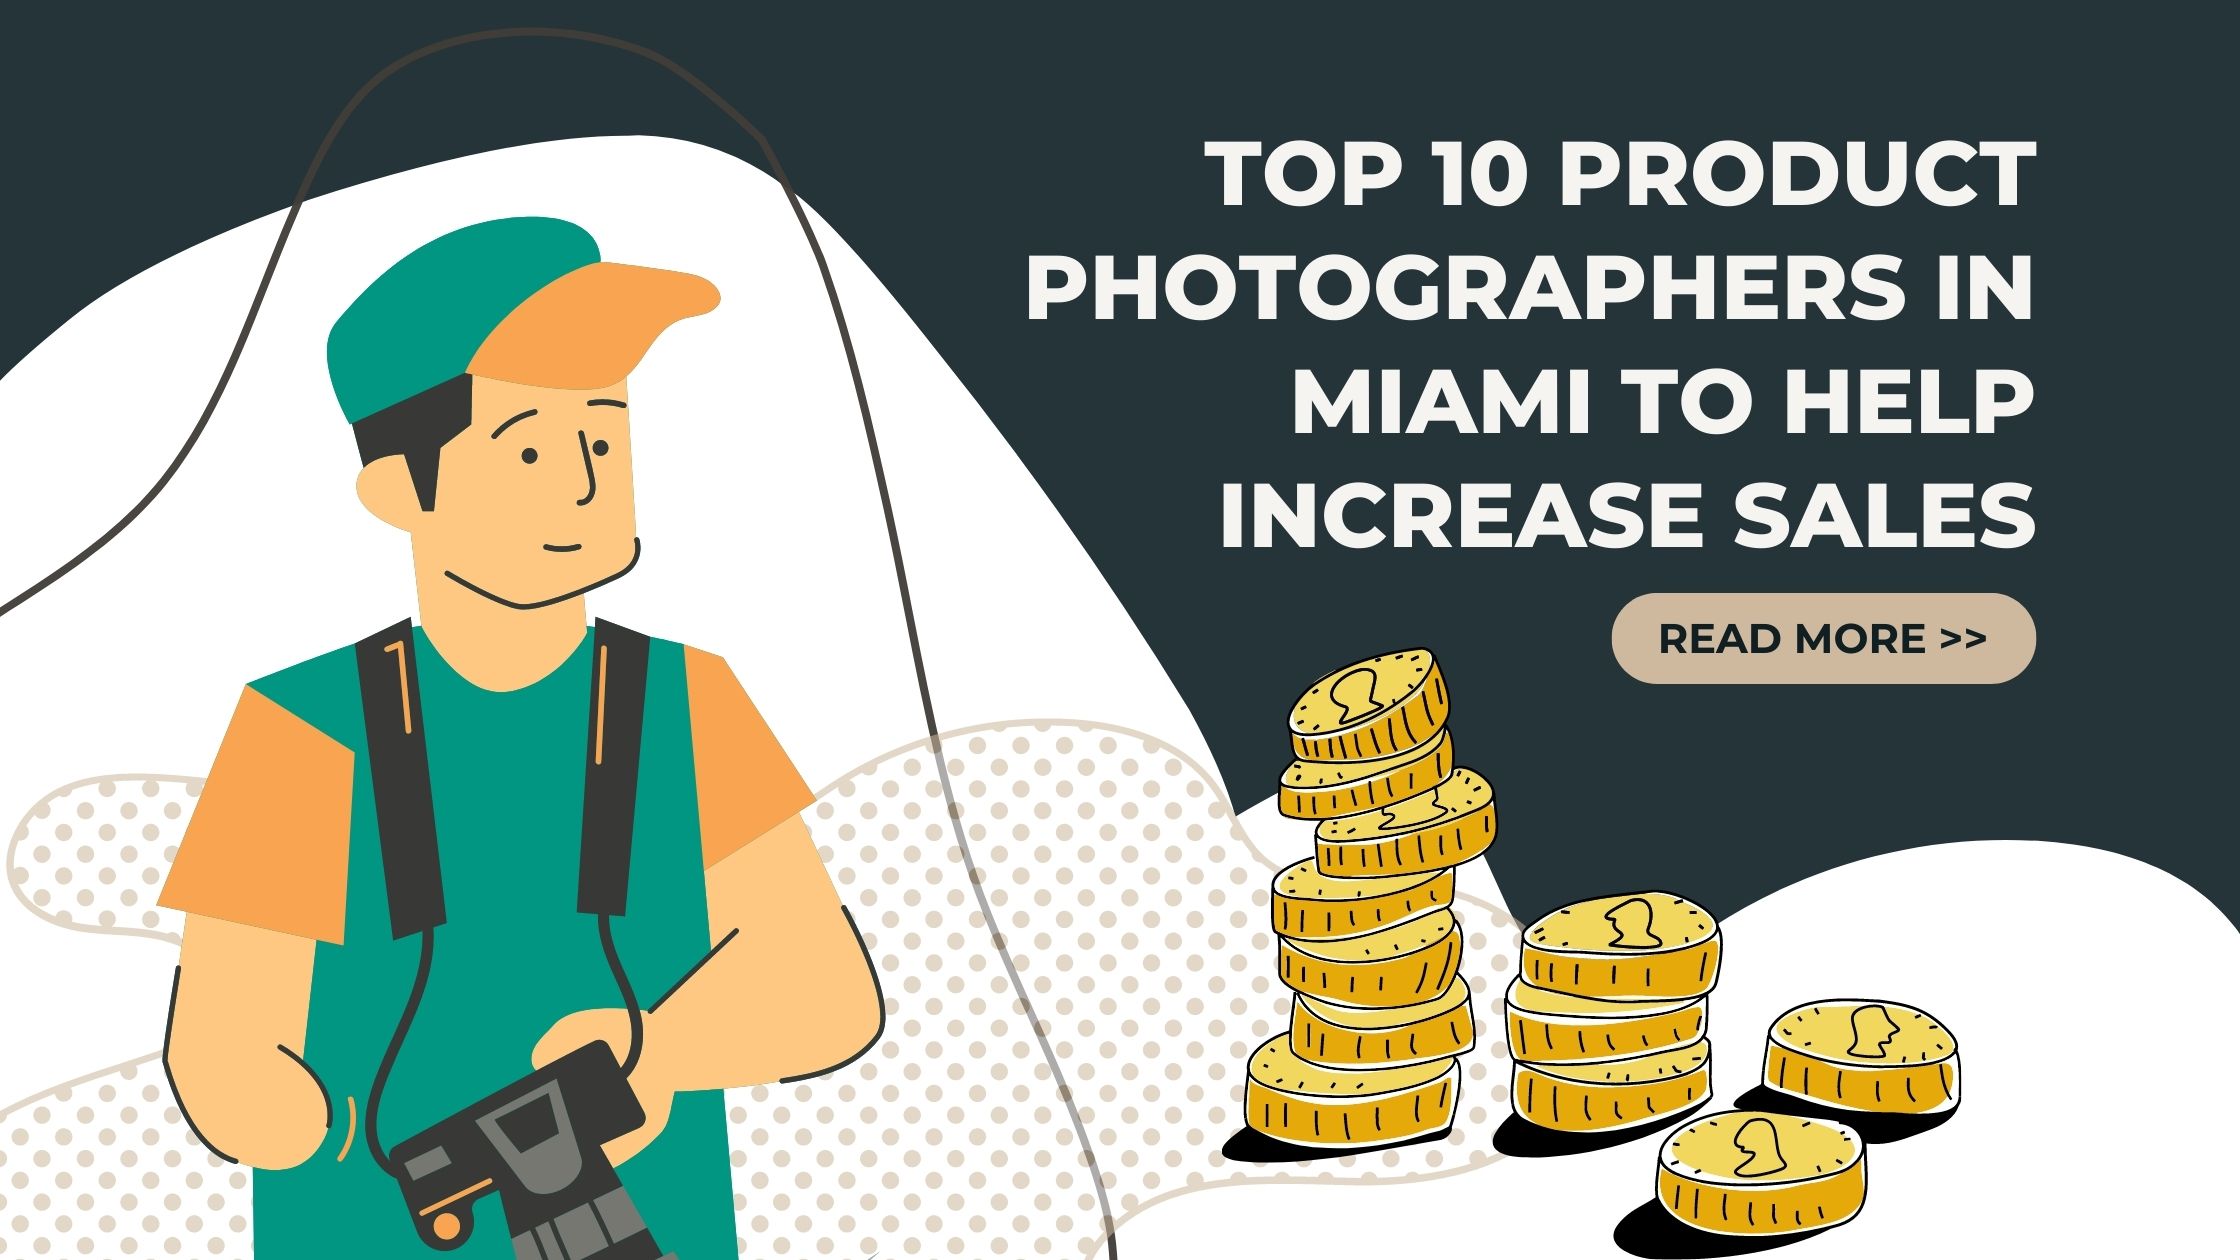 Top 10 Product Photographers in Miami